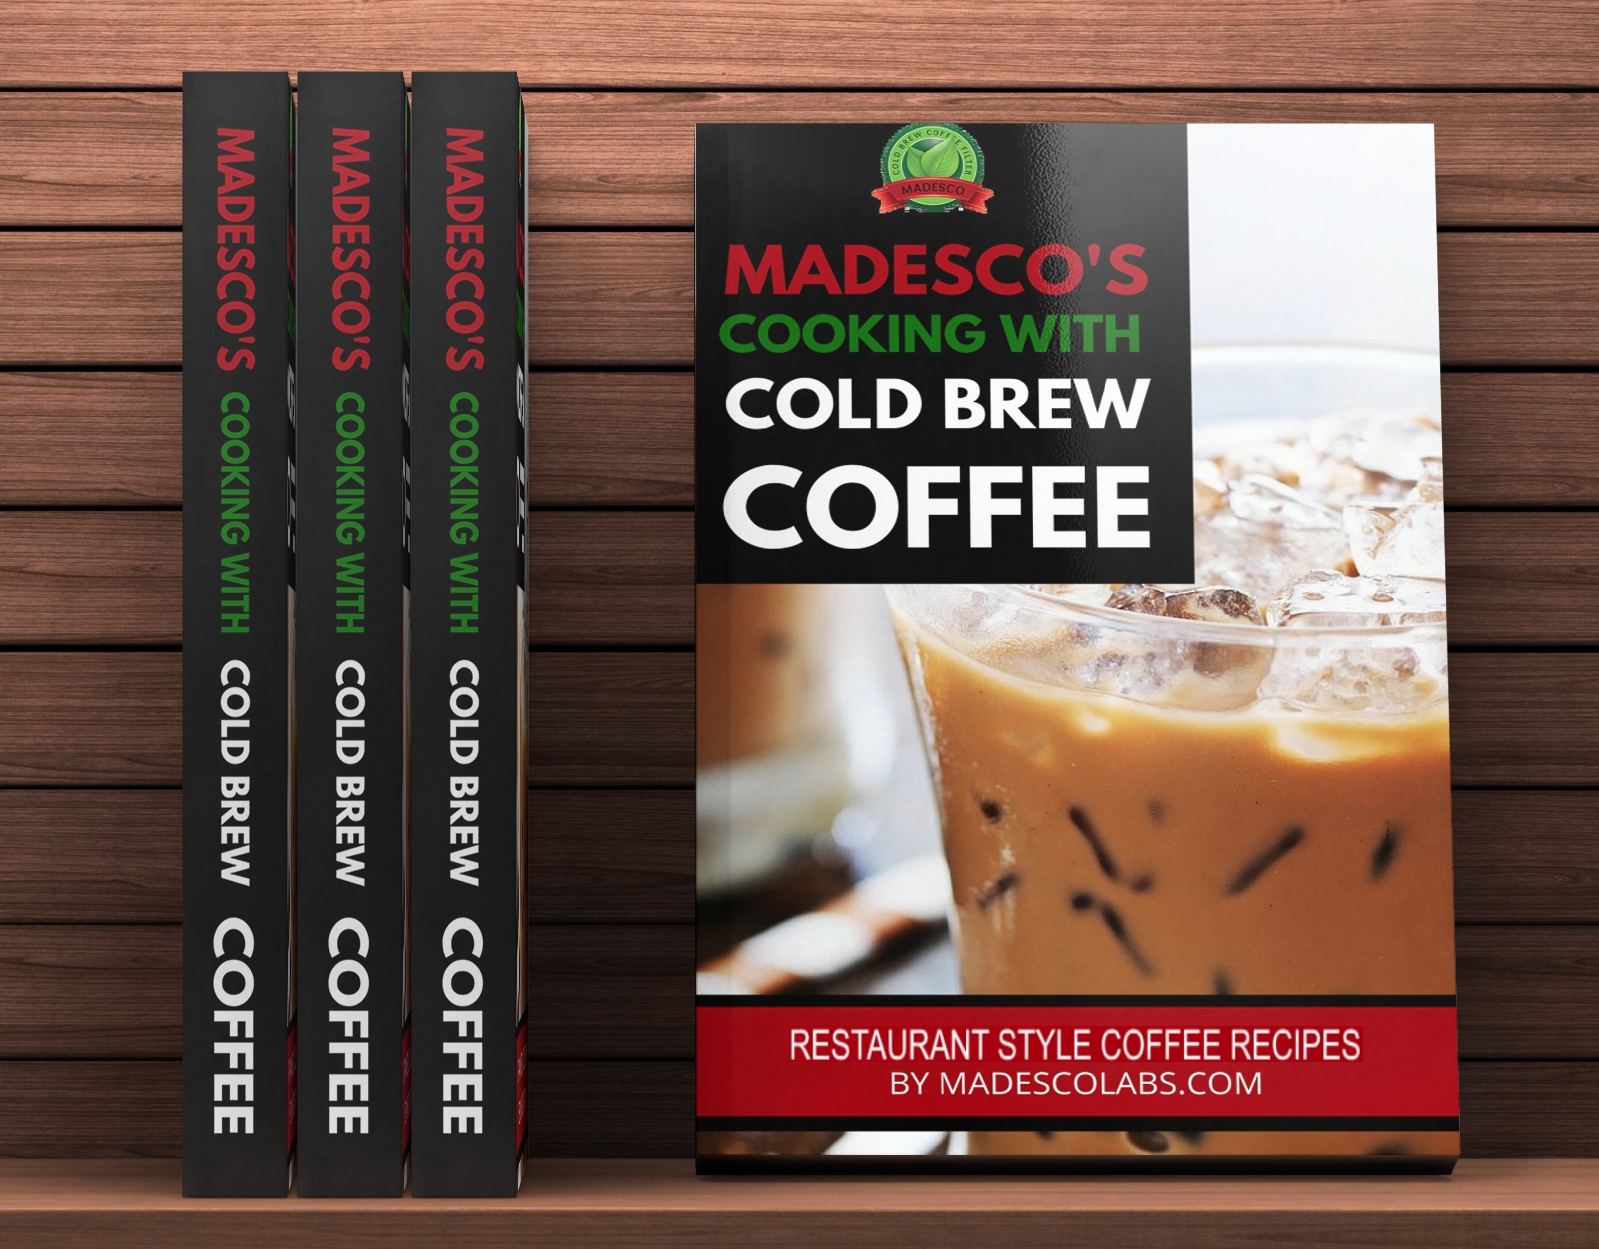 FREE COOKING WITH COLD BREW COFFEE RECIPE BOOK!